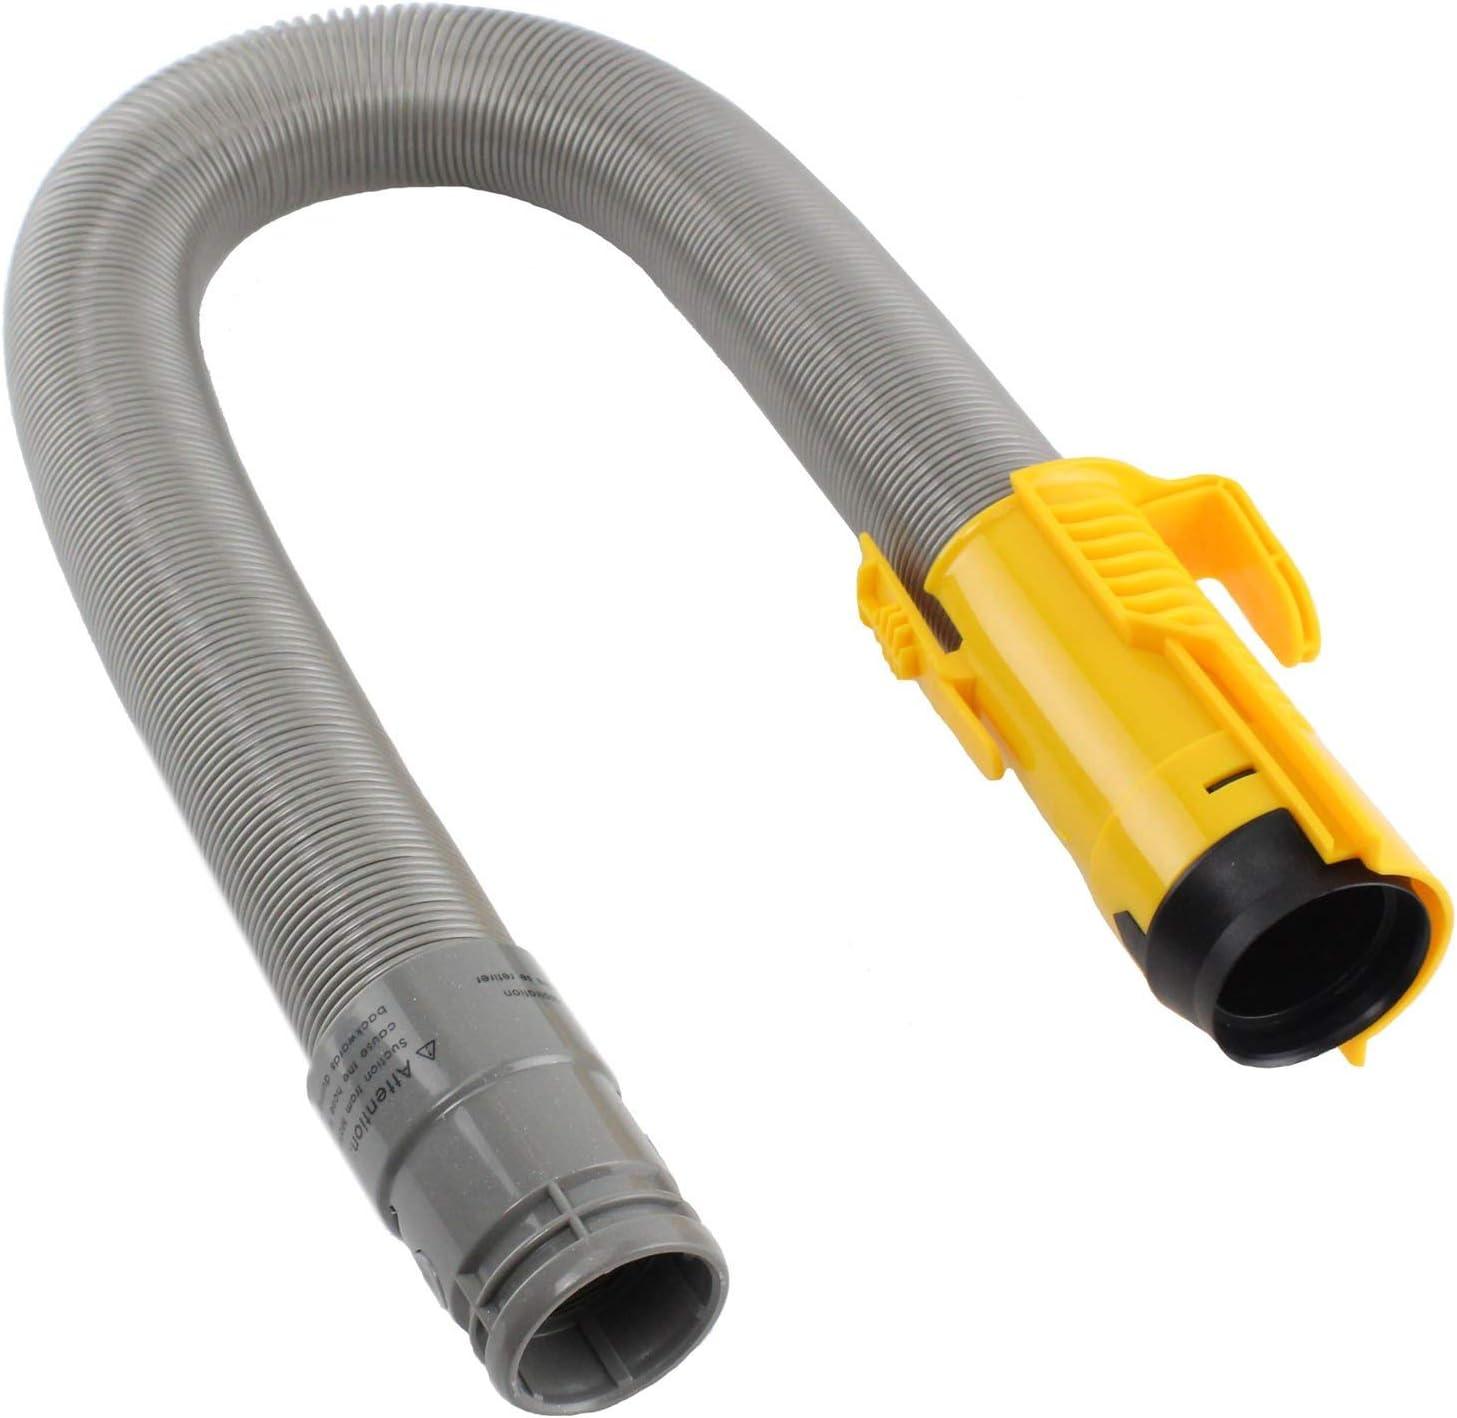 Dyson DC07 Yellow Hose Main Rear Stretch Vacuum Pipe - Vacuum Cleaner Clinic 